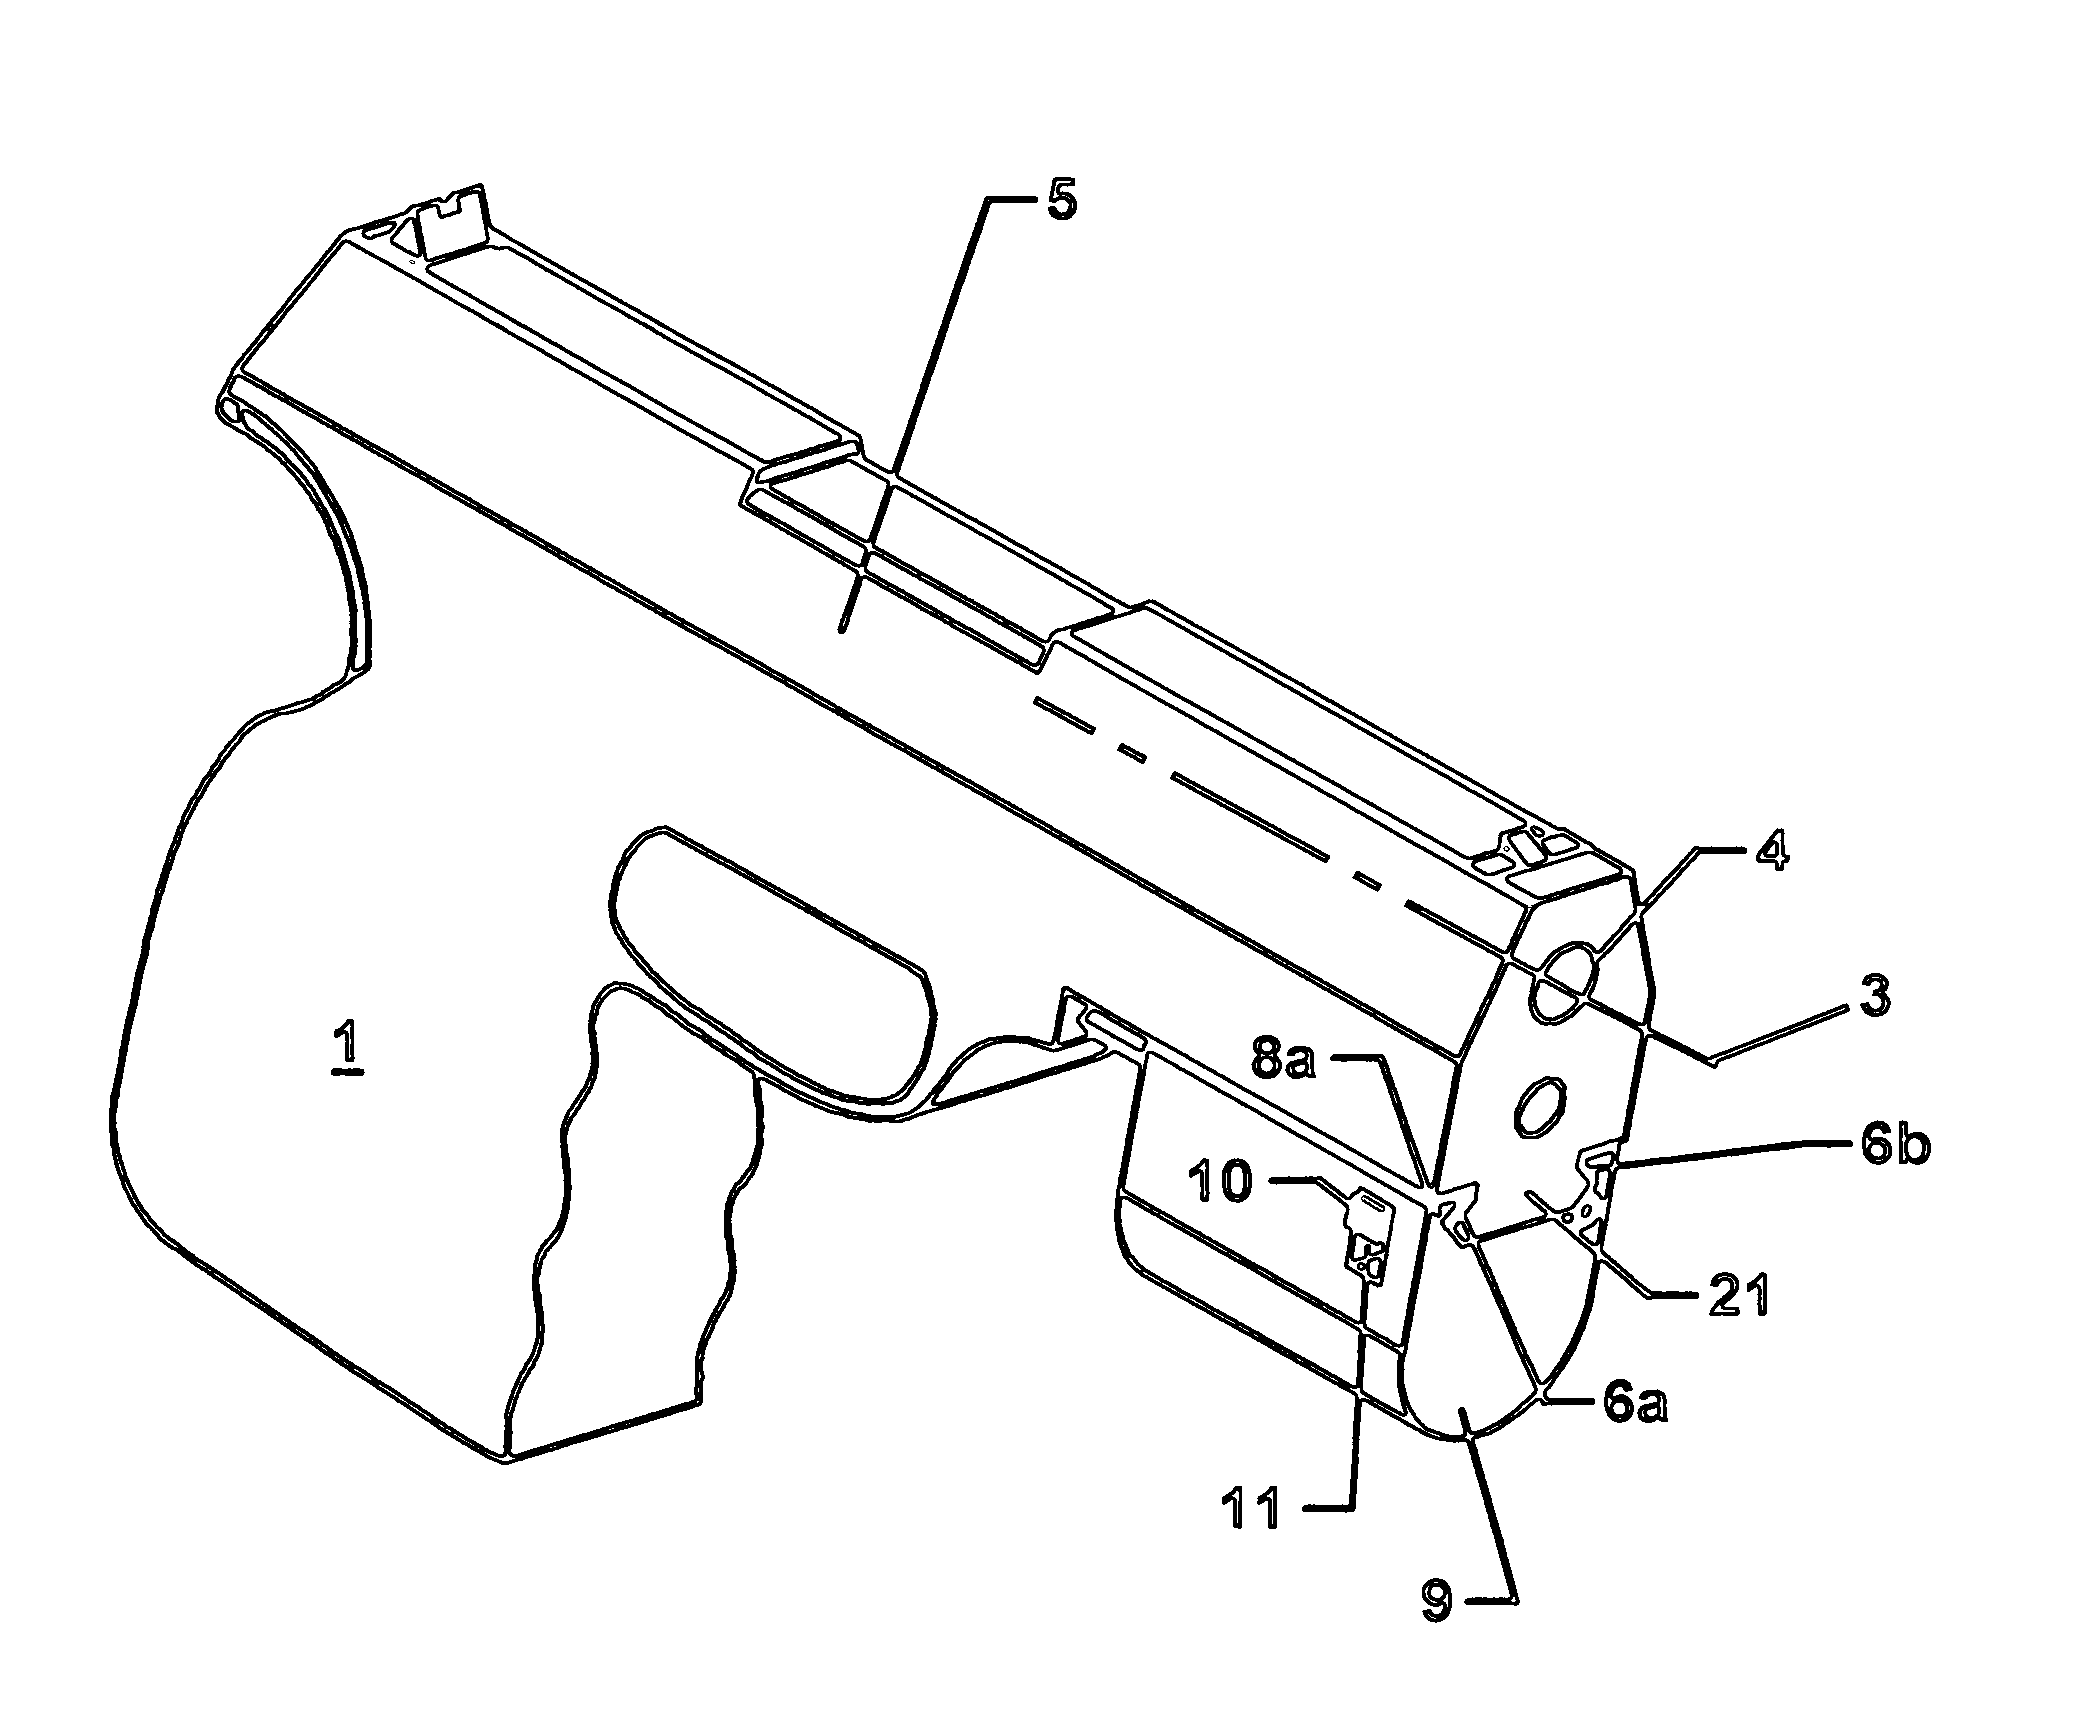 Attachment system used to mount accessory devices to a firearm